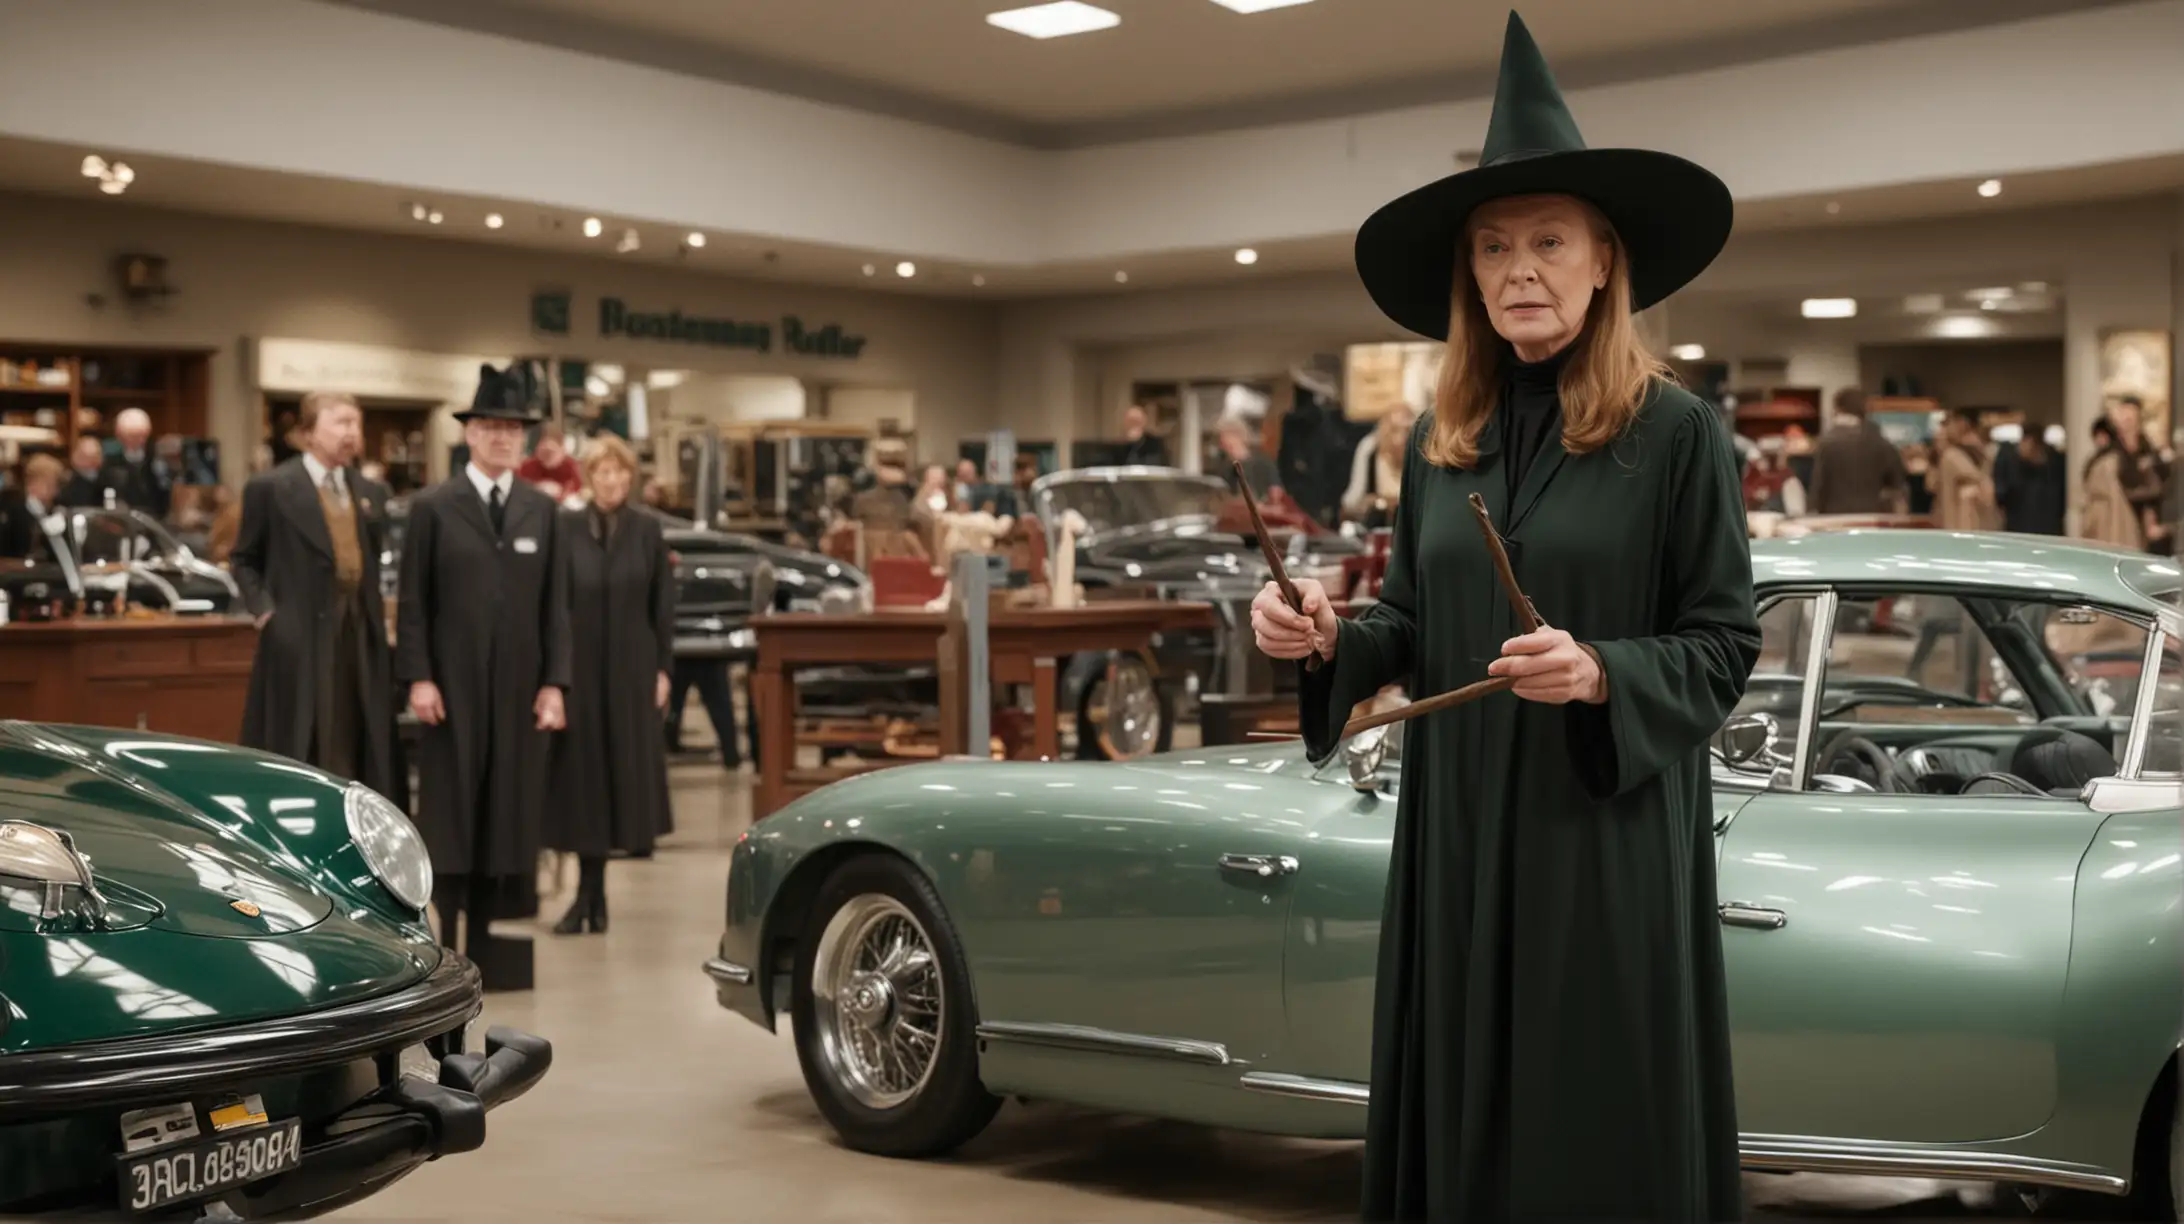 We see McGonagall from Harry Potter in a Porsche shop. She is standing in the middle of the showroom in her costume, looking at a model car. She has a wand in her hand, a long hat.